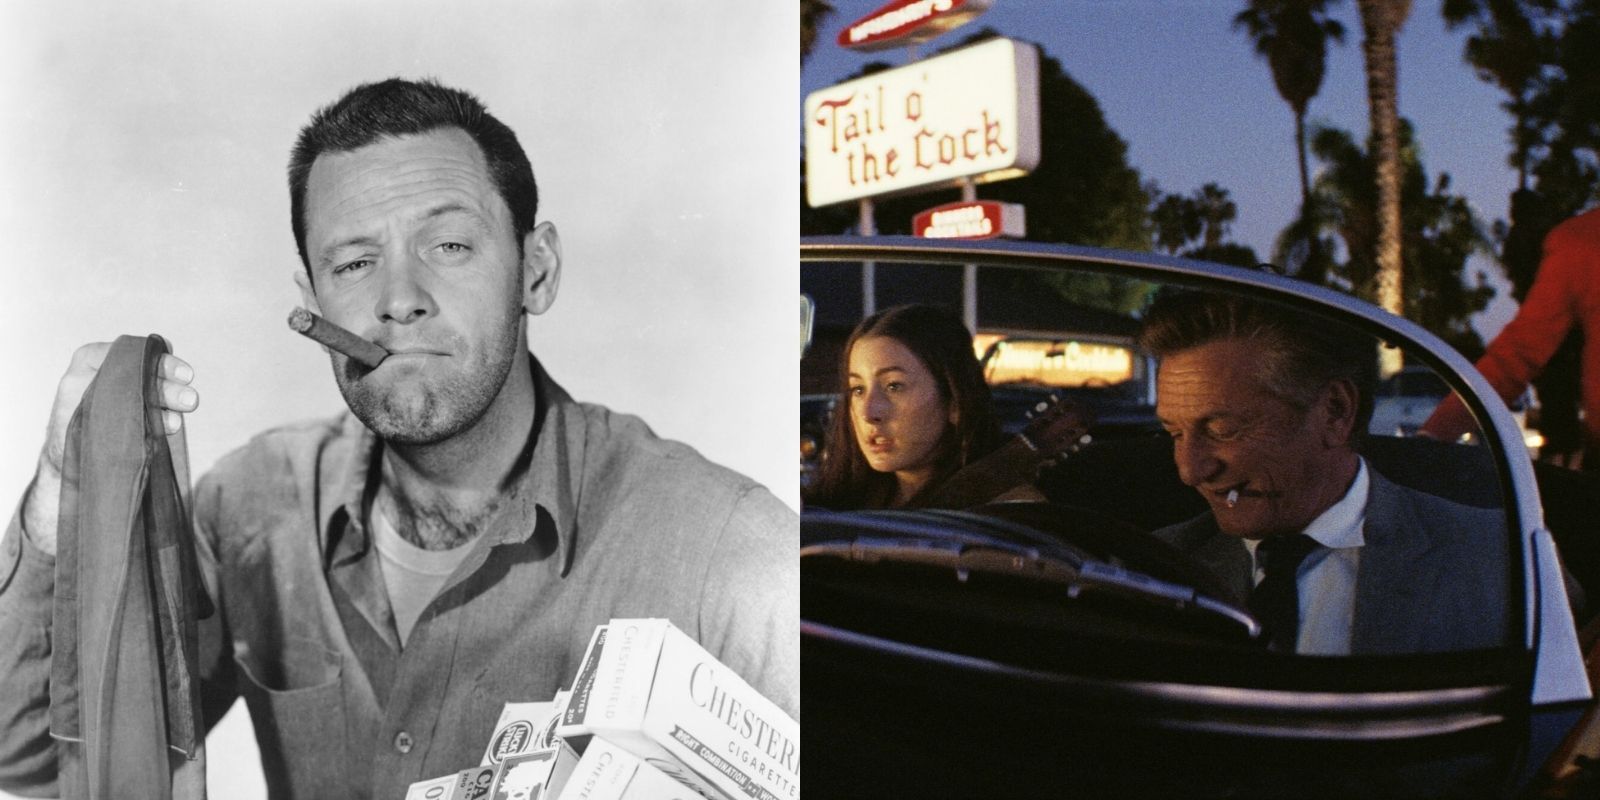 Sean Penn and William Holden comparison from Licorice Pizza